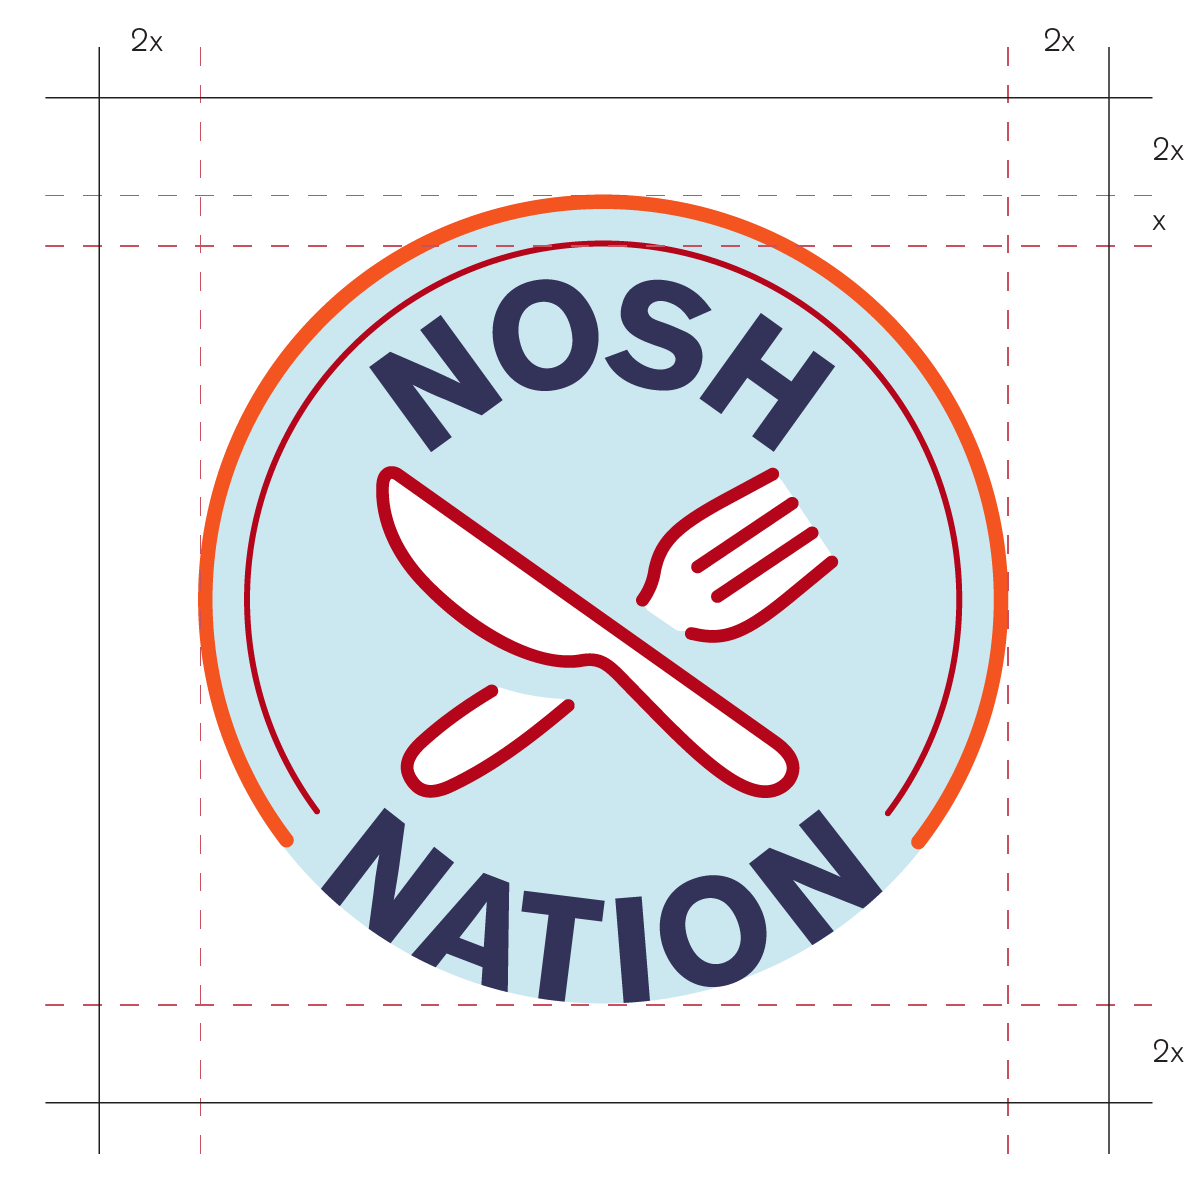 Nosh Nation Final, full color logo with measurements